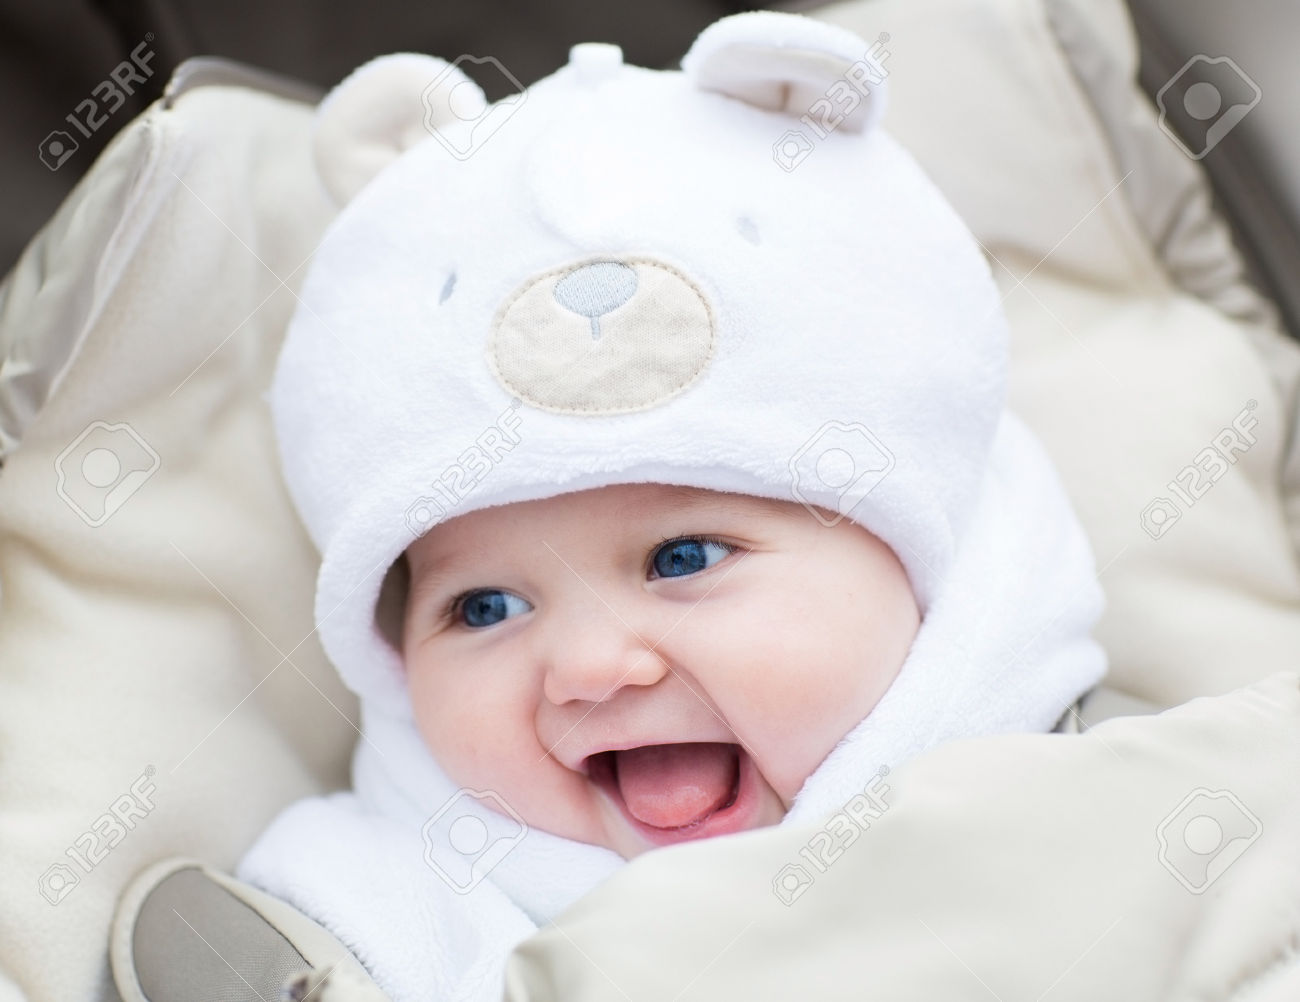 78-Funny-laughing-baby-in-a-teddy-bear-hat-sitting-in-a-stroller-on-c-old-winter-day-Stock-Photo.jpg